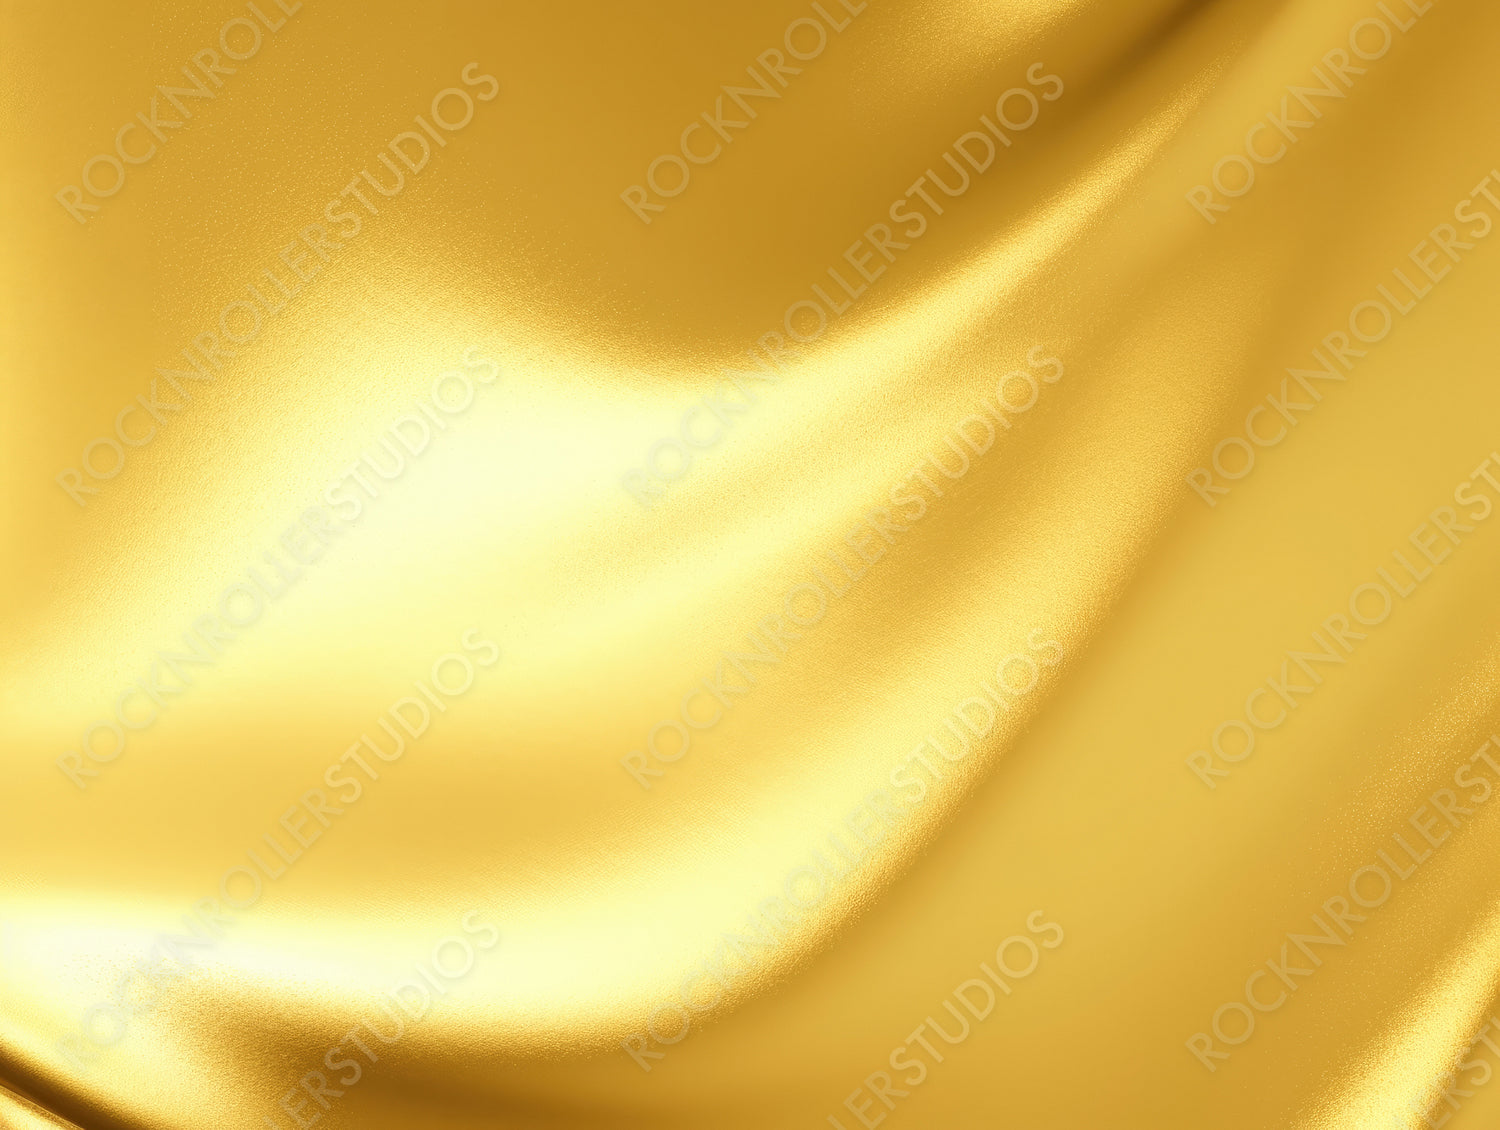 Gold Foil Background with Light Reflections